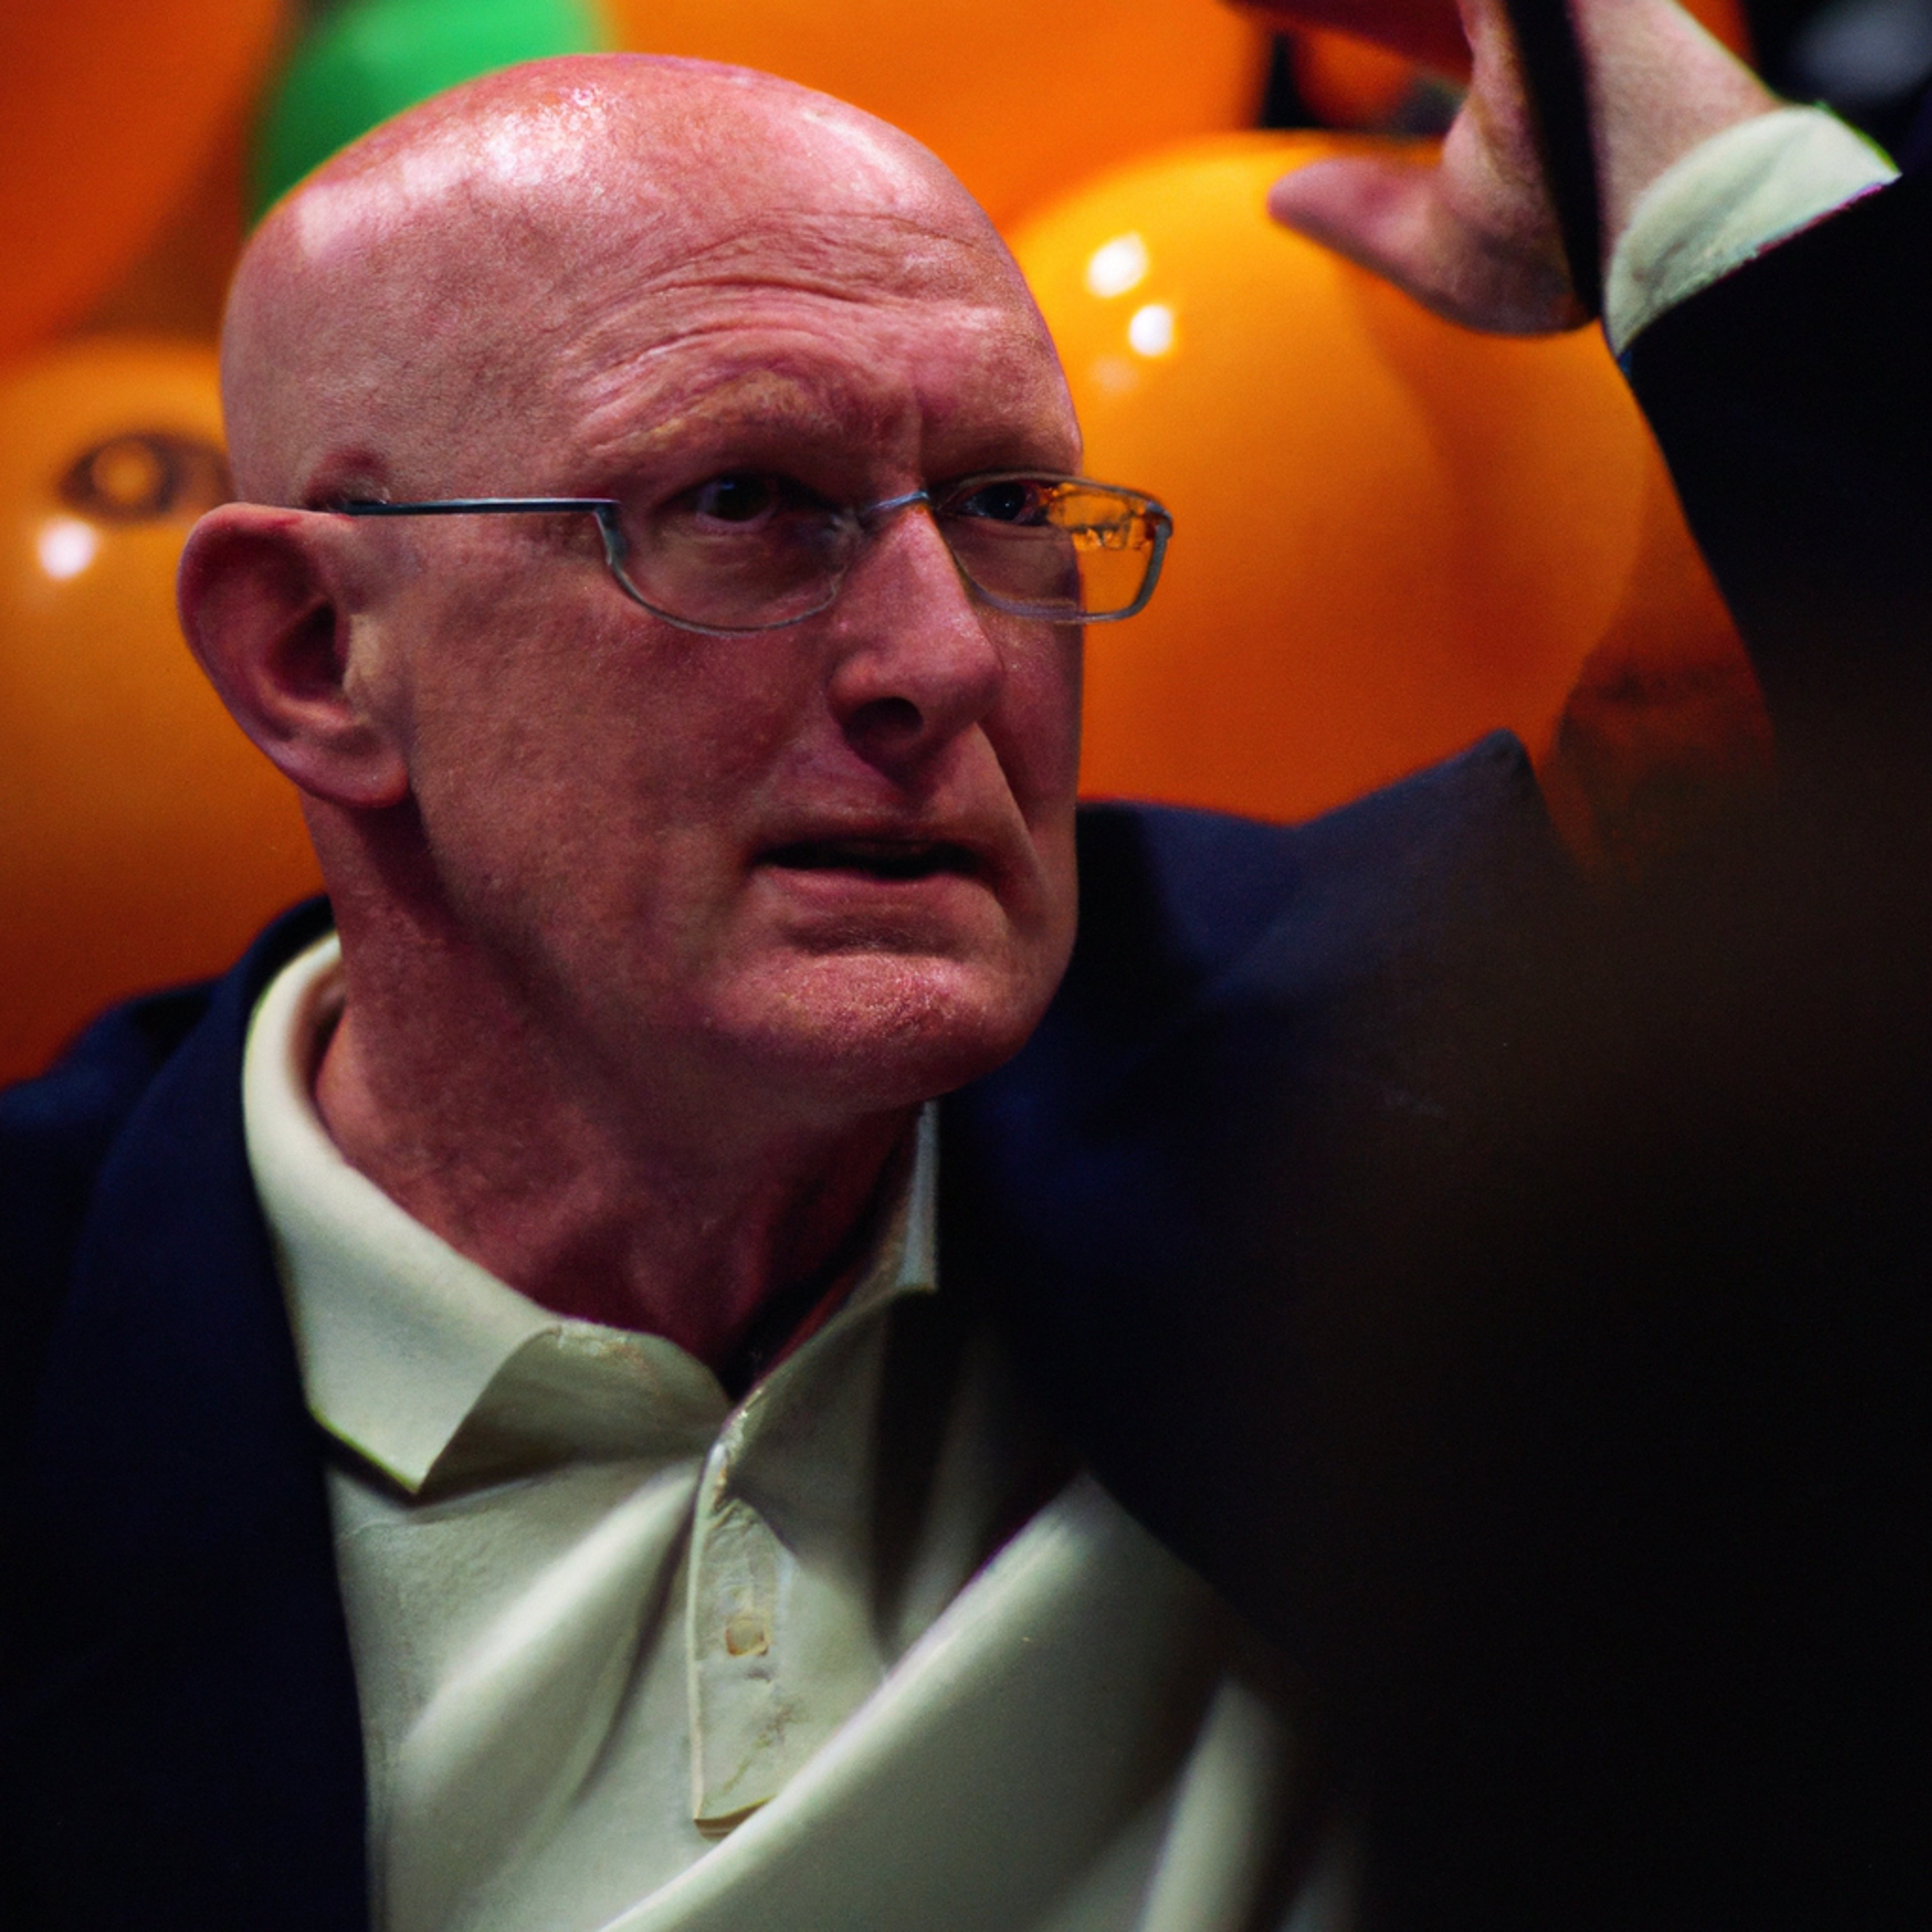 Miami’s Jim Larranaga to Meet UConn in Final Four, 17 Years After Historic Victory